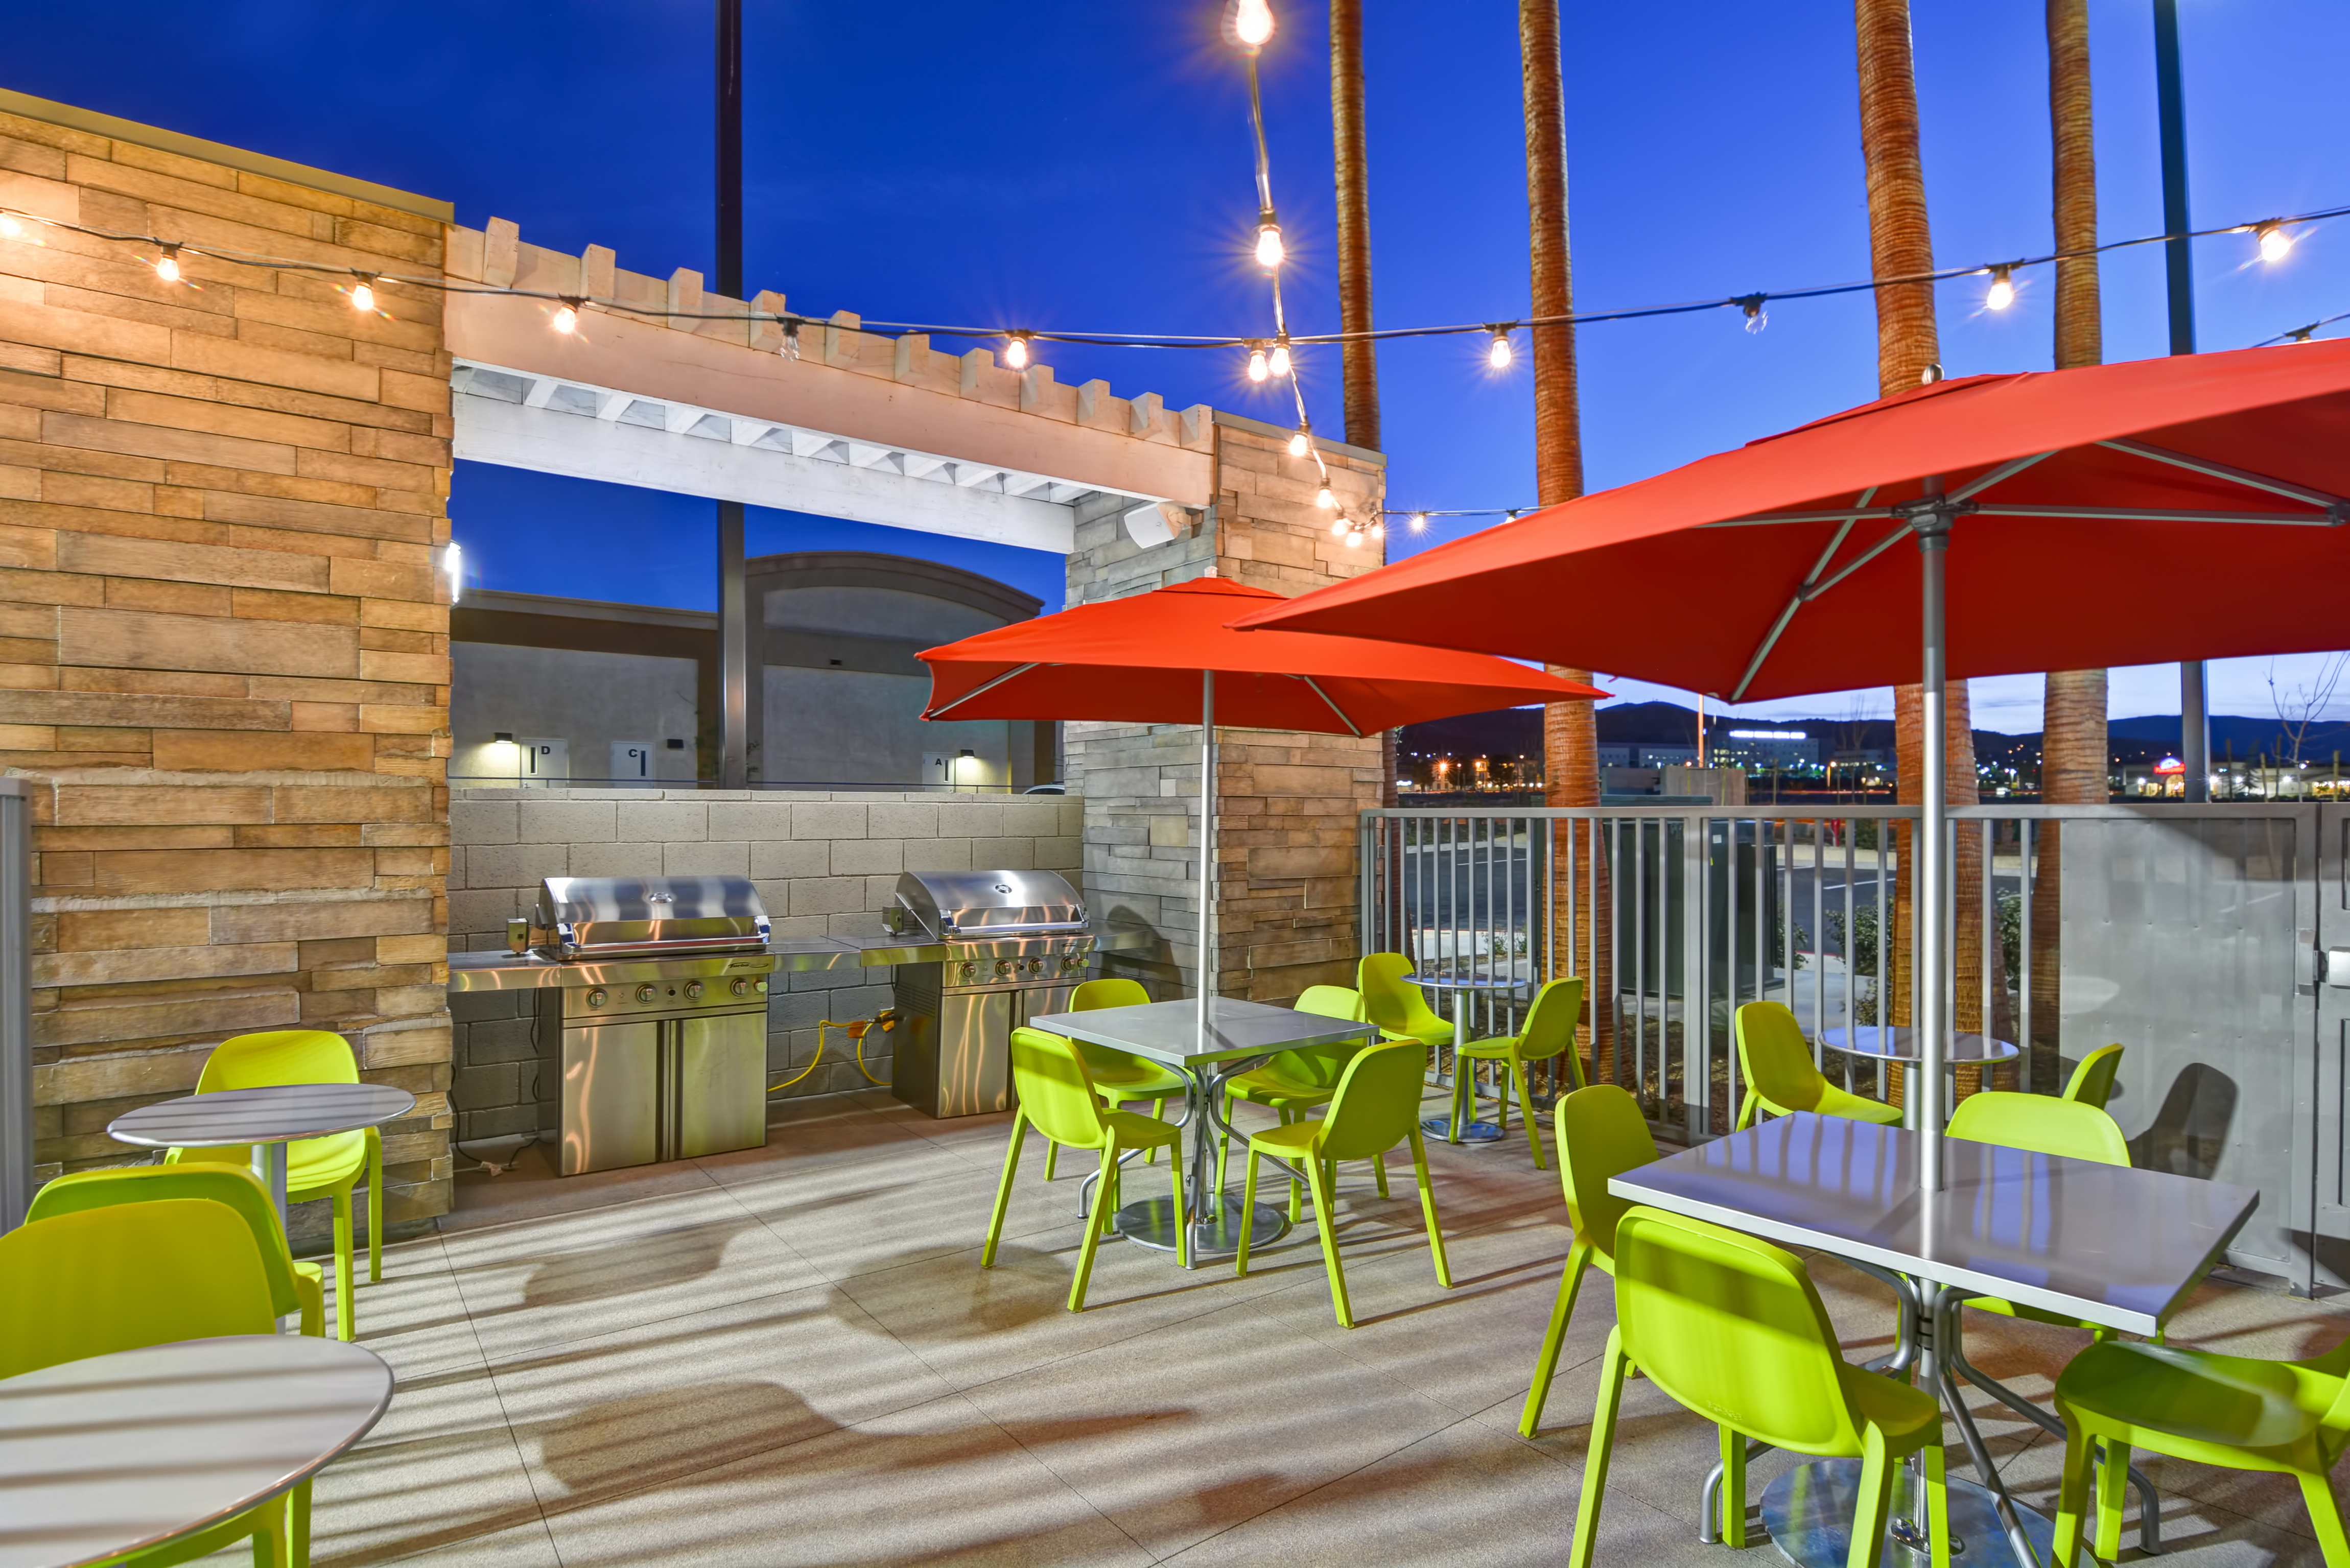 Outdoor Patio with Seating and BBQ Grill